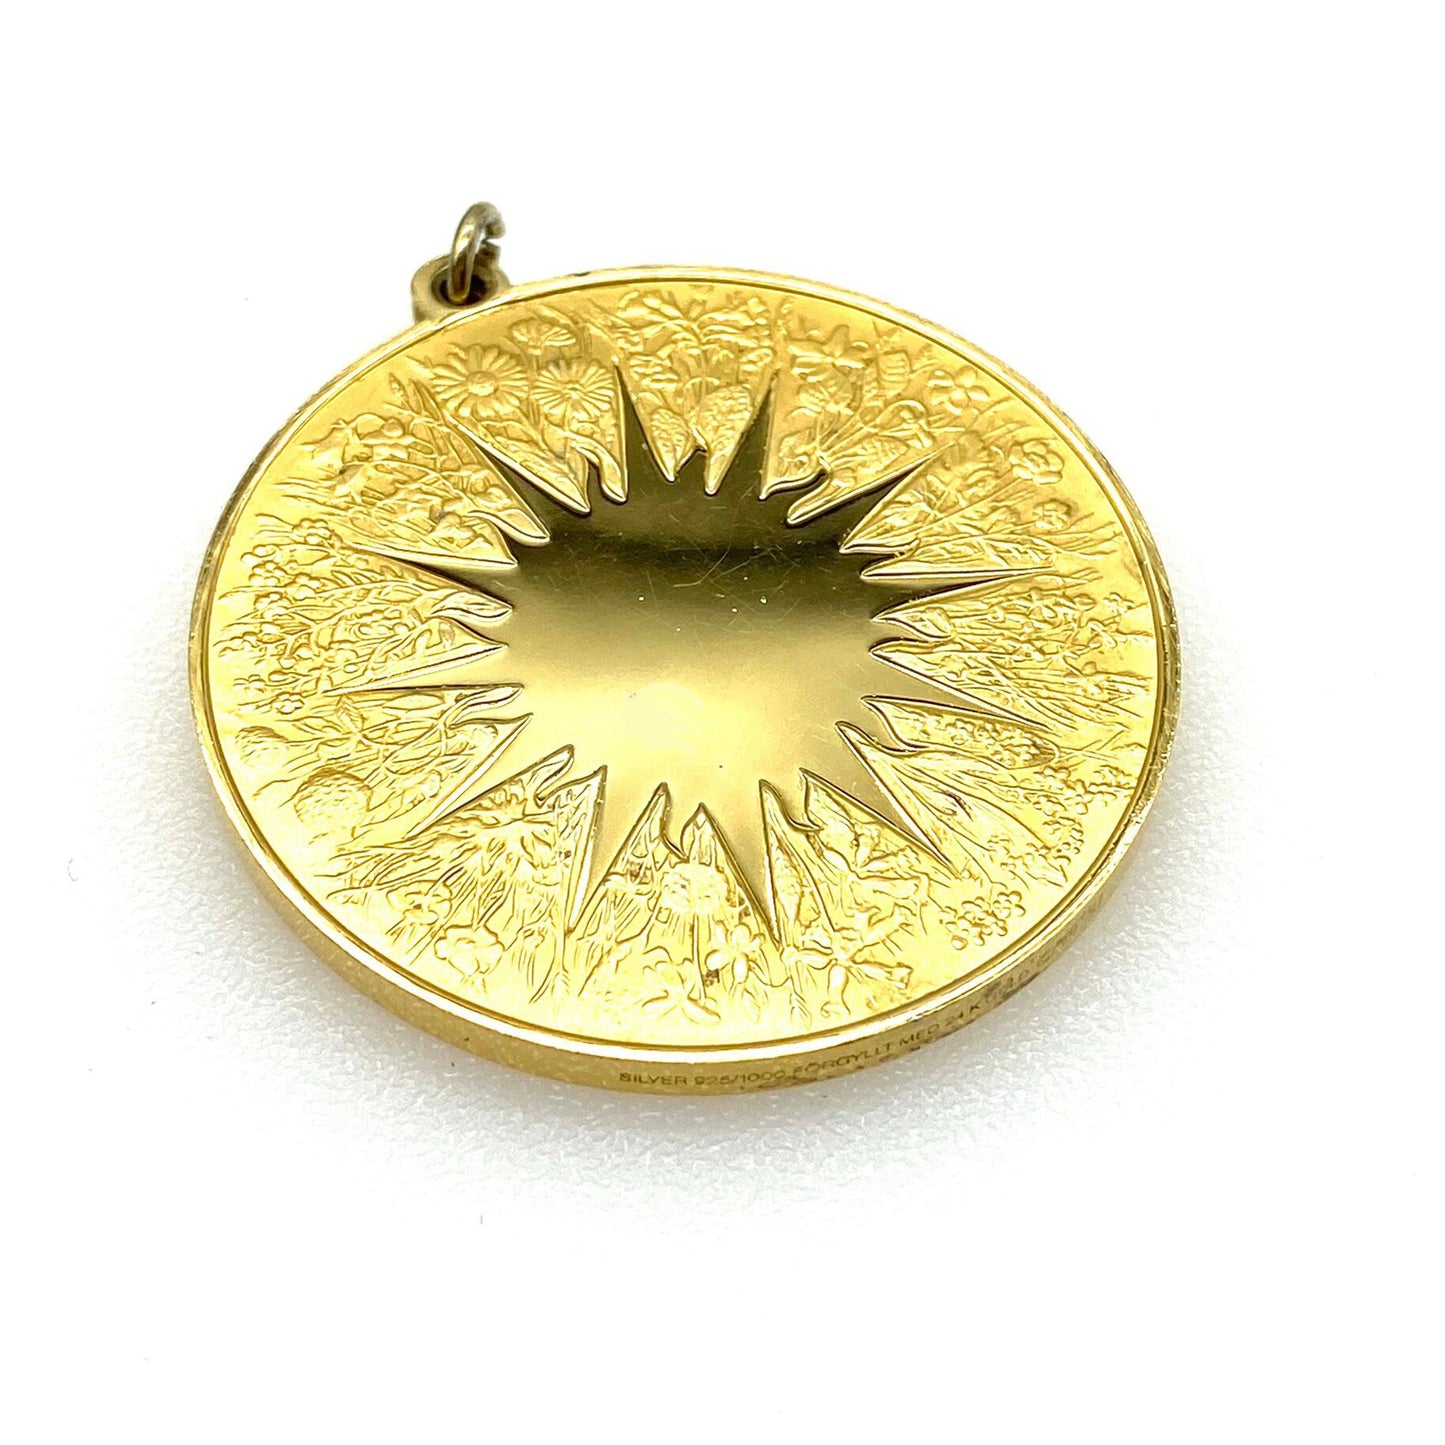 John Pinches 1976 Franklin Mint 24K Gold Plated Over Silver 925/1000 Medallion With A Poem By PDA Atterbom